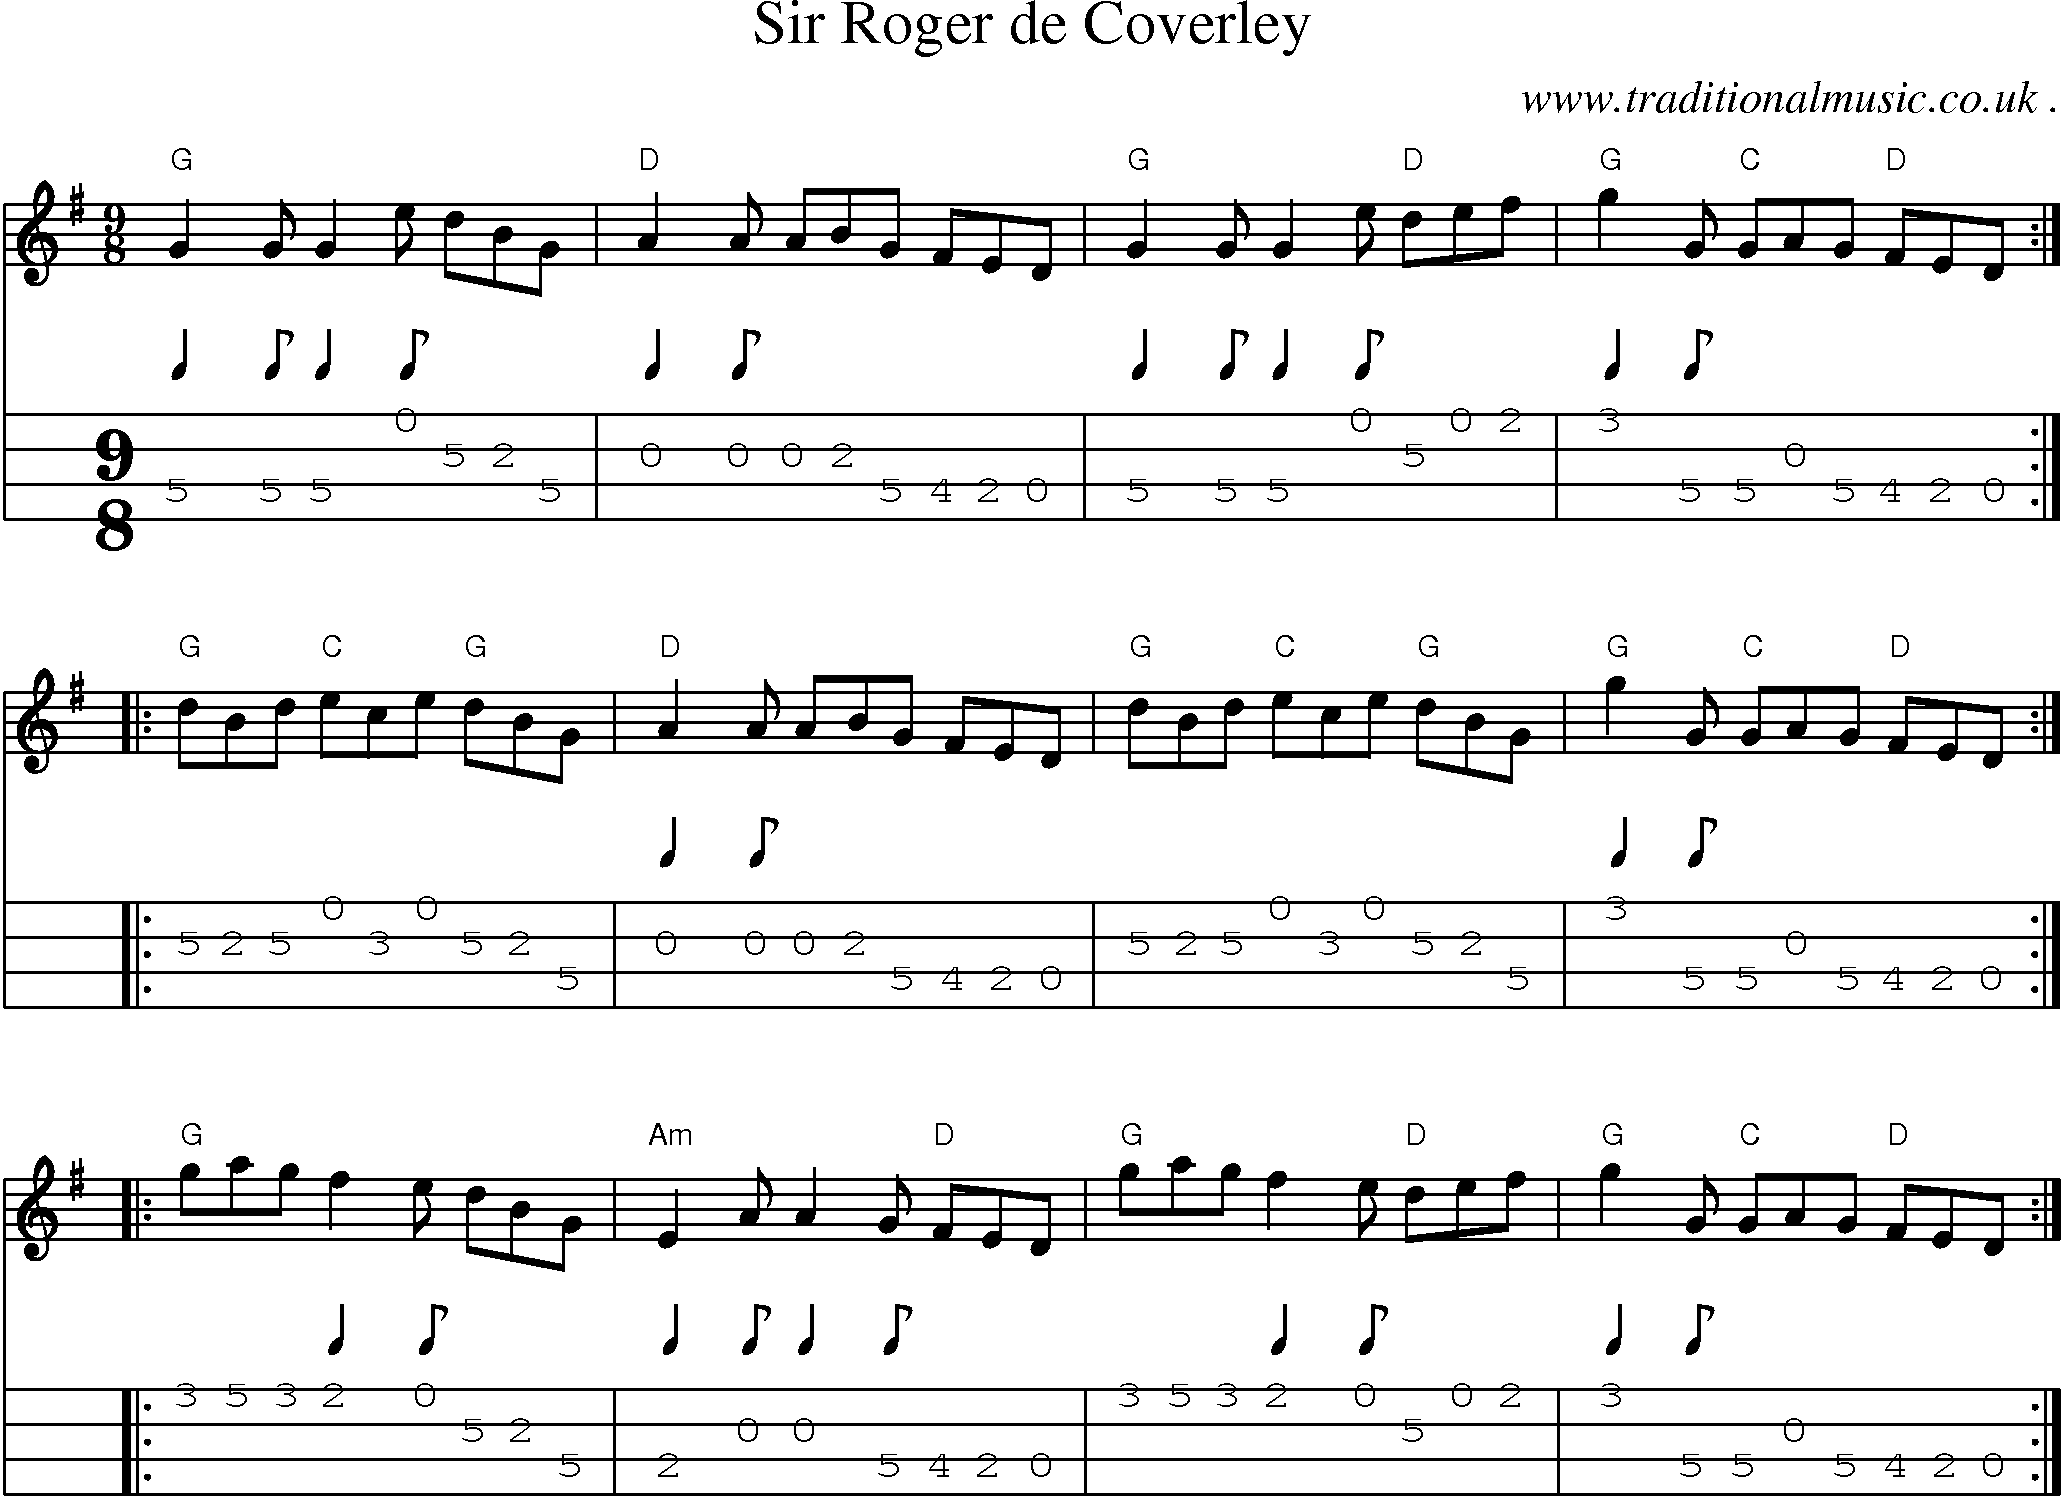 Music Score and Guitar Tabs for Sir Roger de Coverley